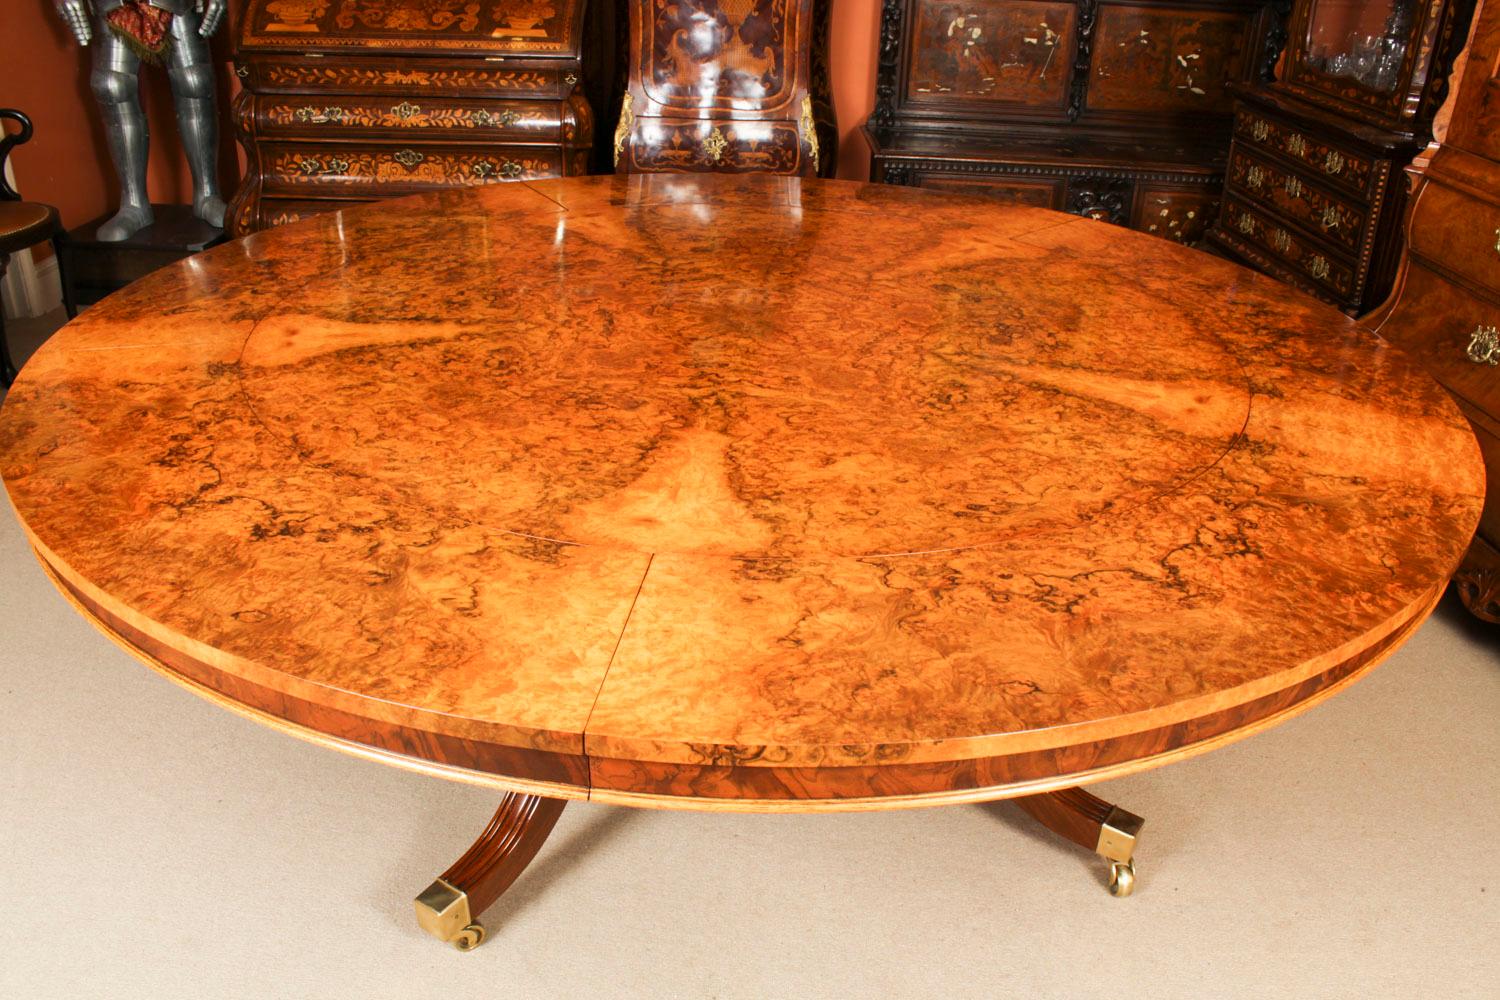 This is a beautiful and rare antique Regency Revival burr walnut extending dining table  in the manner of Johnstone Jupe & Co,  Circa 1900 in date, and attributed to Arthur Brett & Sons, Norfolk, England.

The table has a wonderful burr walnut top